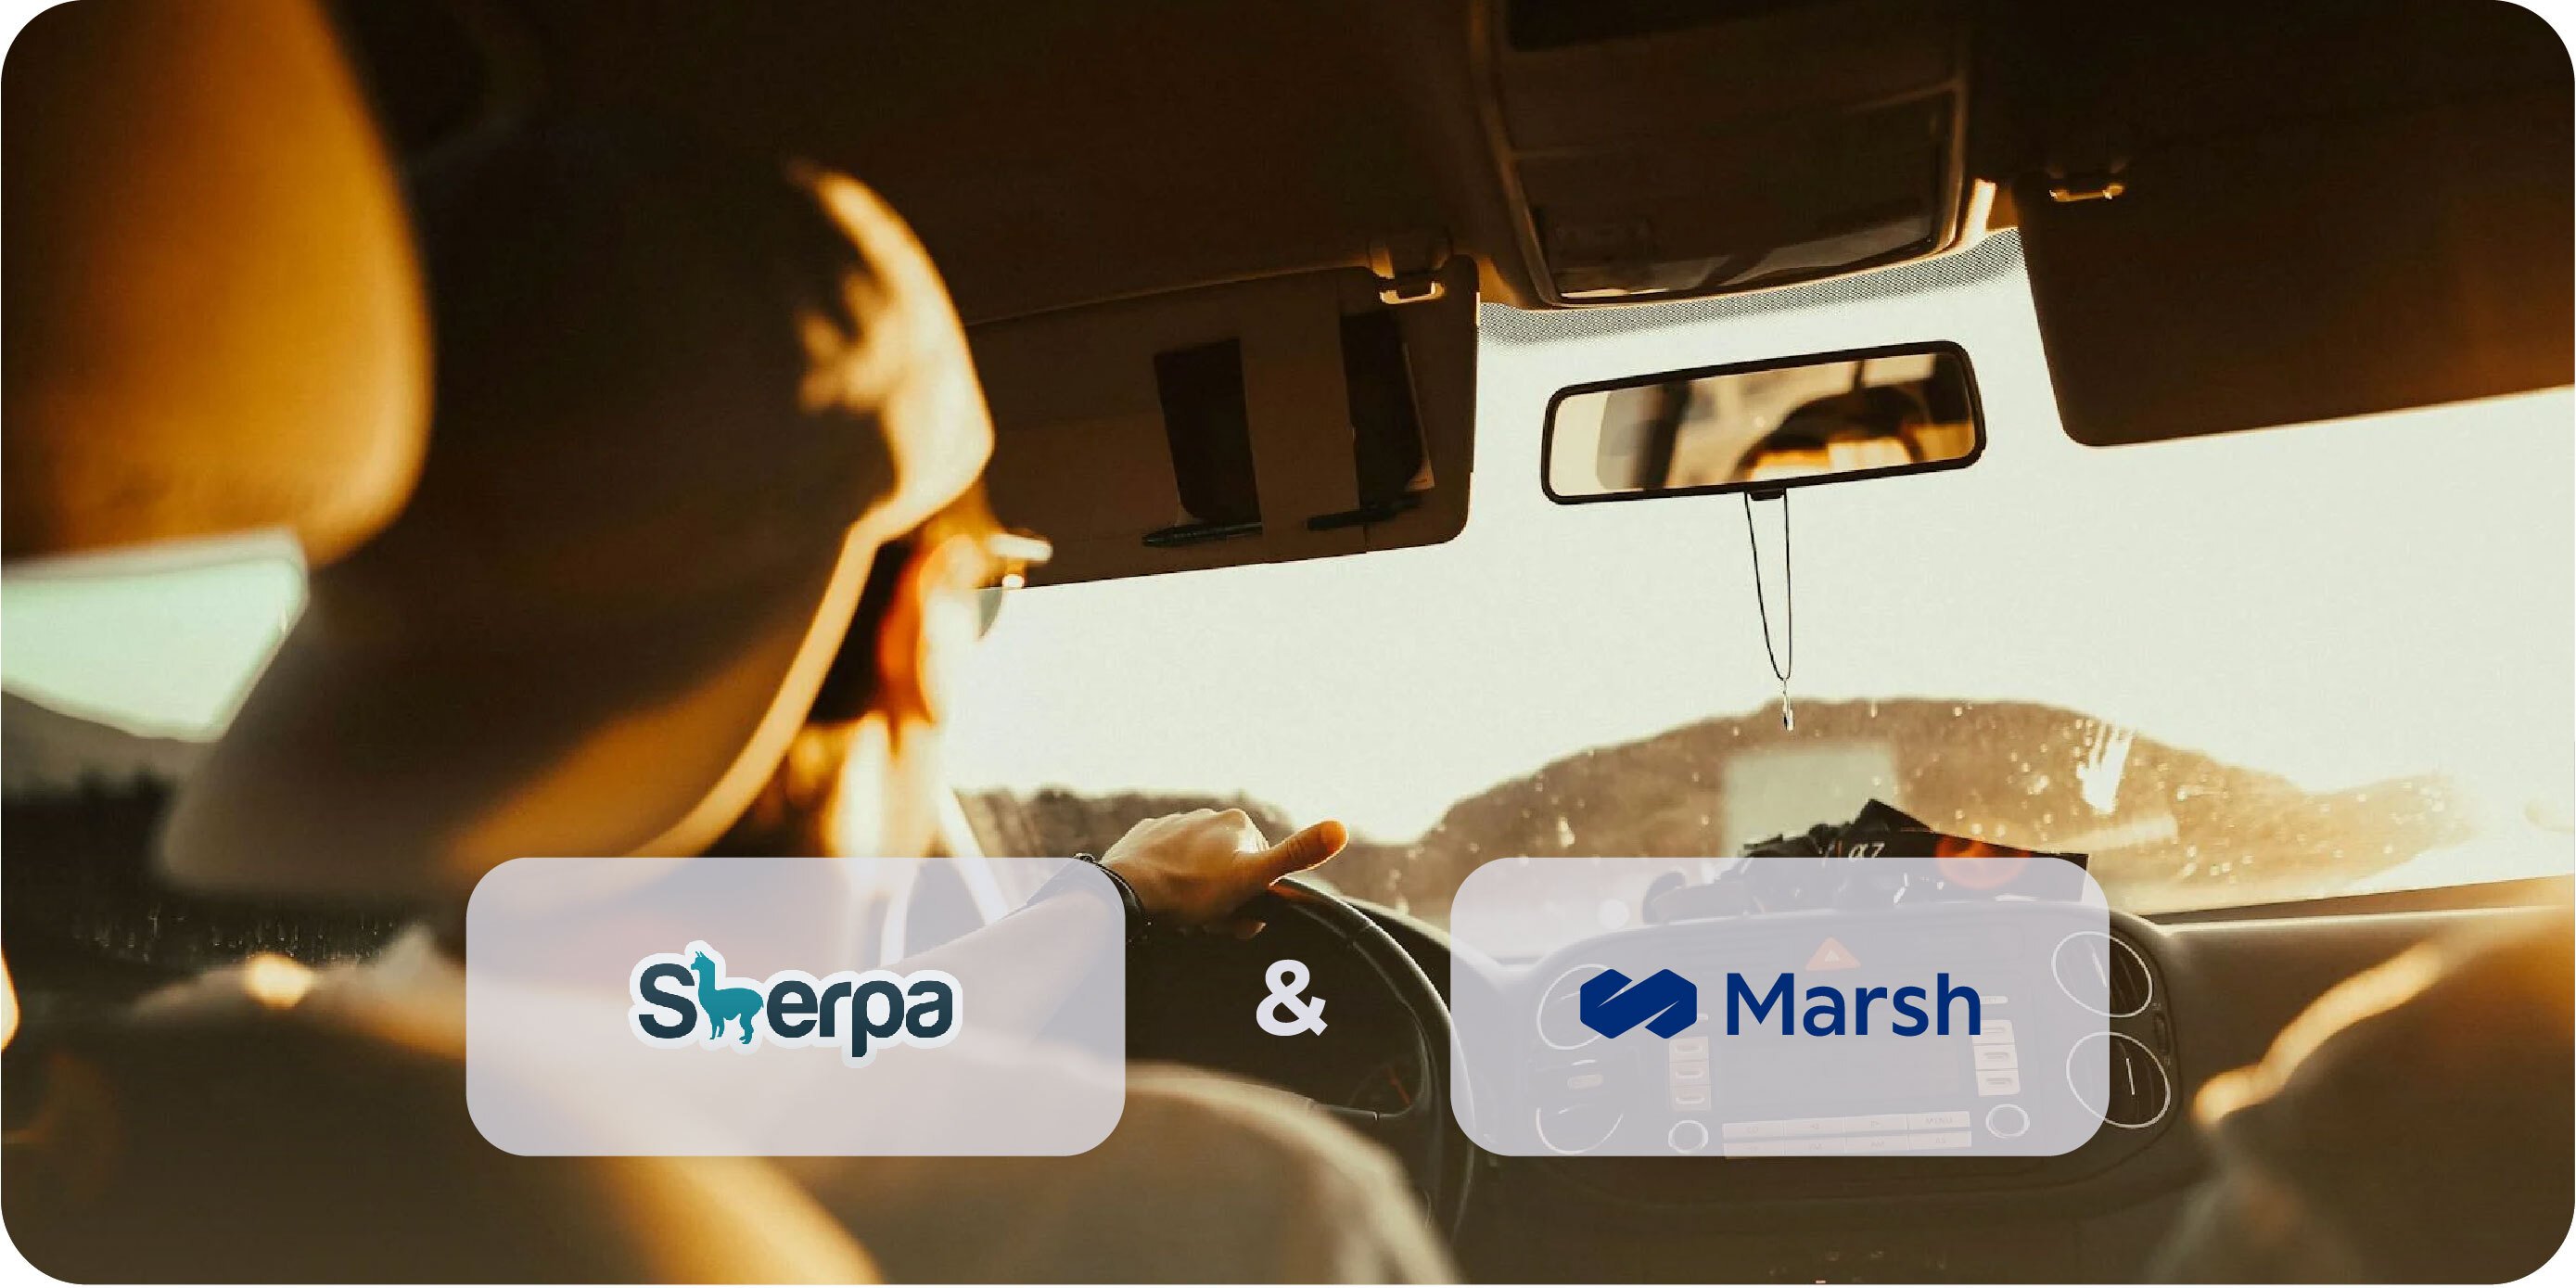 Sherpa & Marsh partnership with image of driver in car